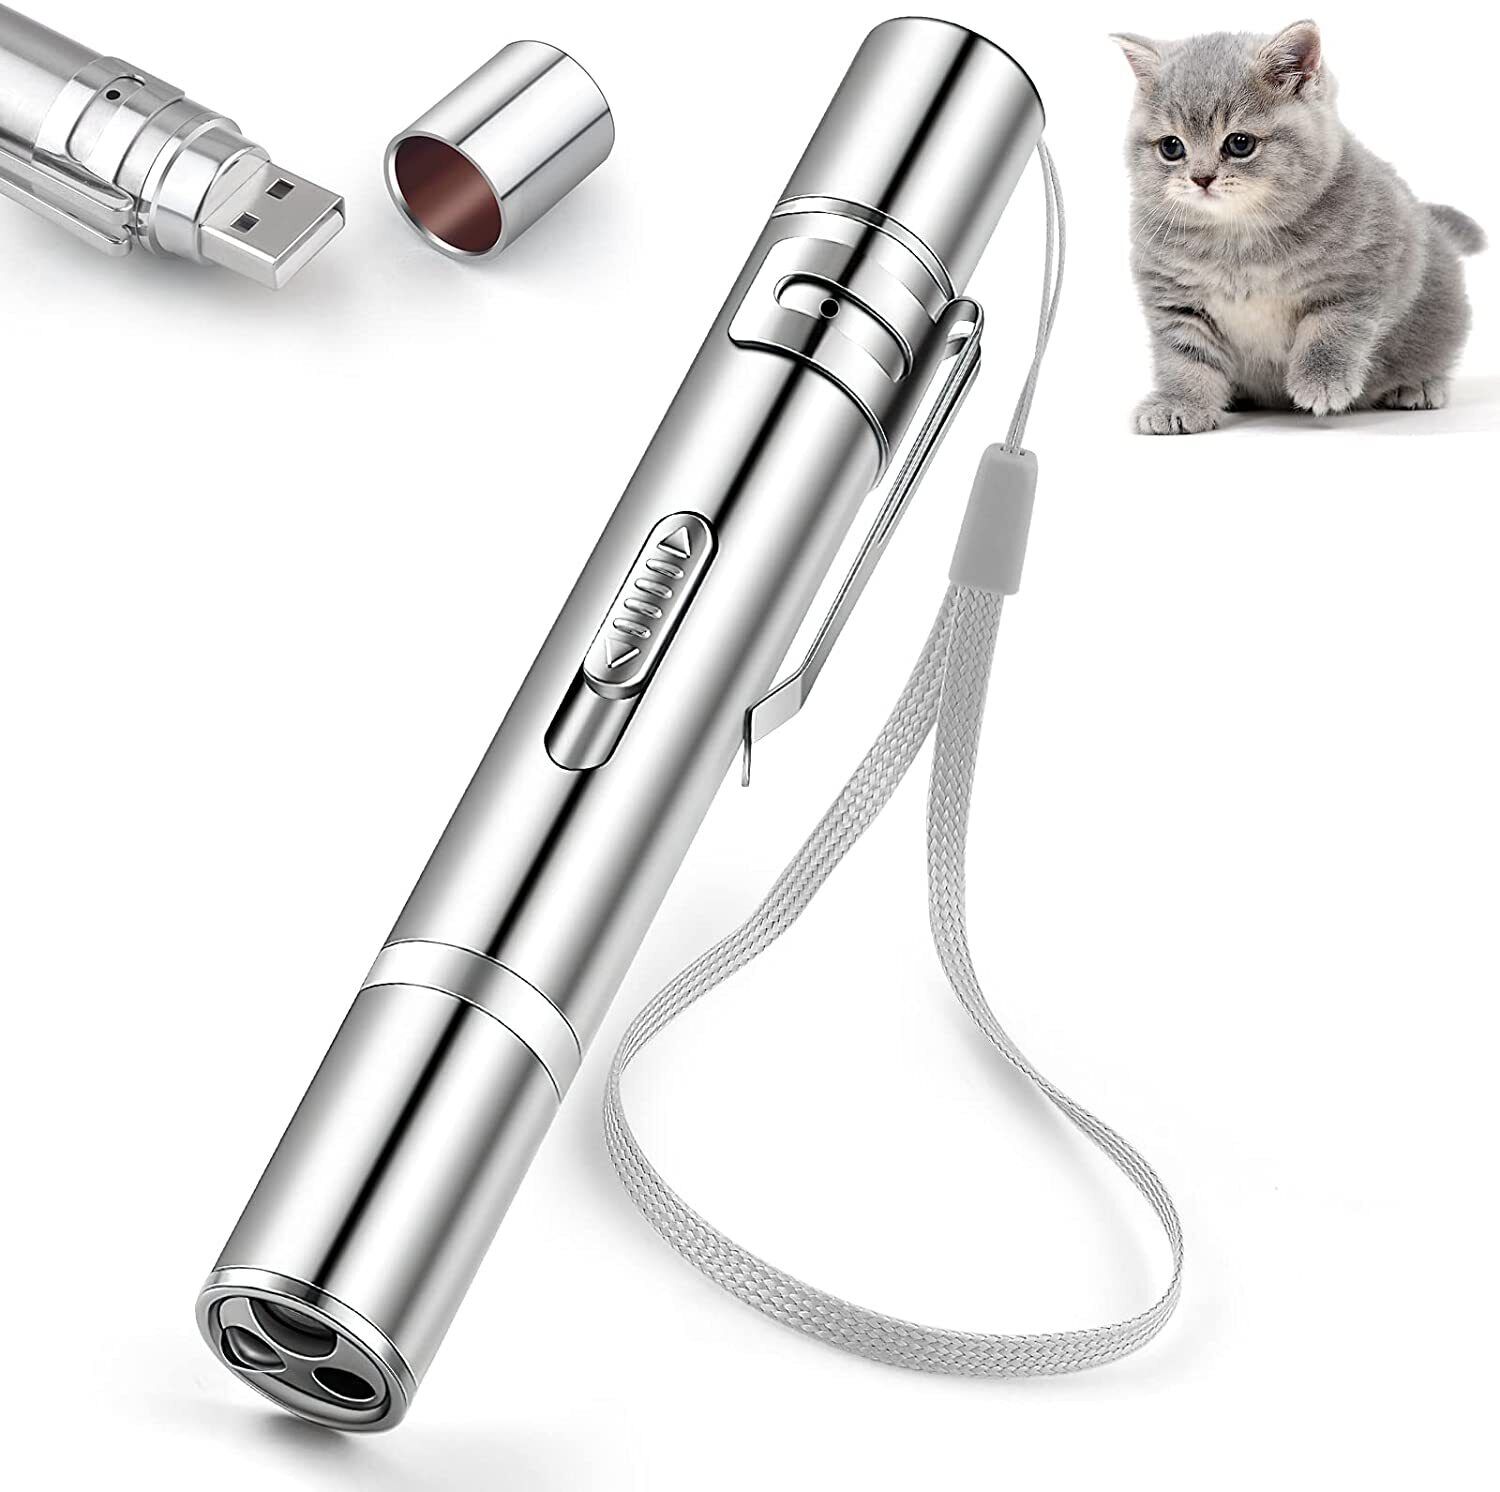 USB RECHARGEABLE SUPER LASER POINTER  PEN 3 in 1 Cat Pet Toy Red UV Flashlight